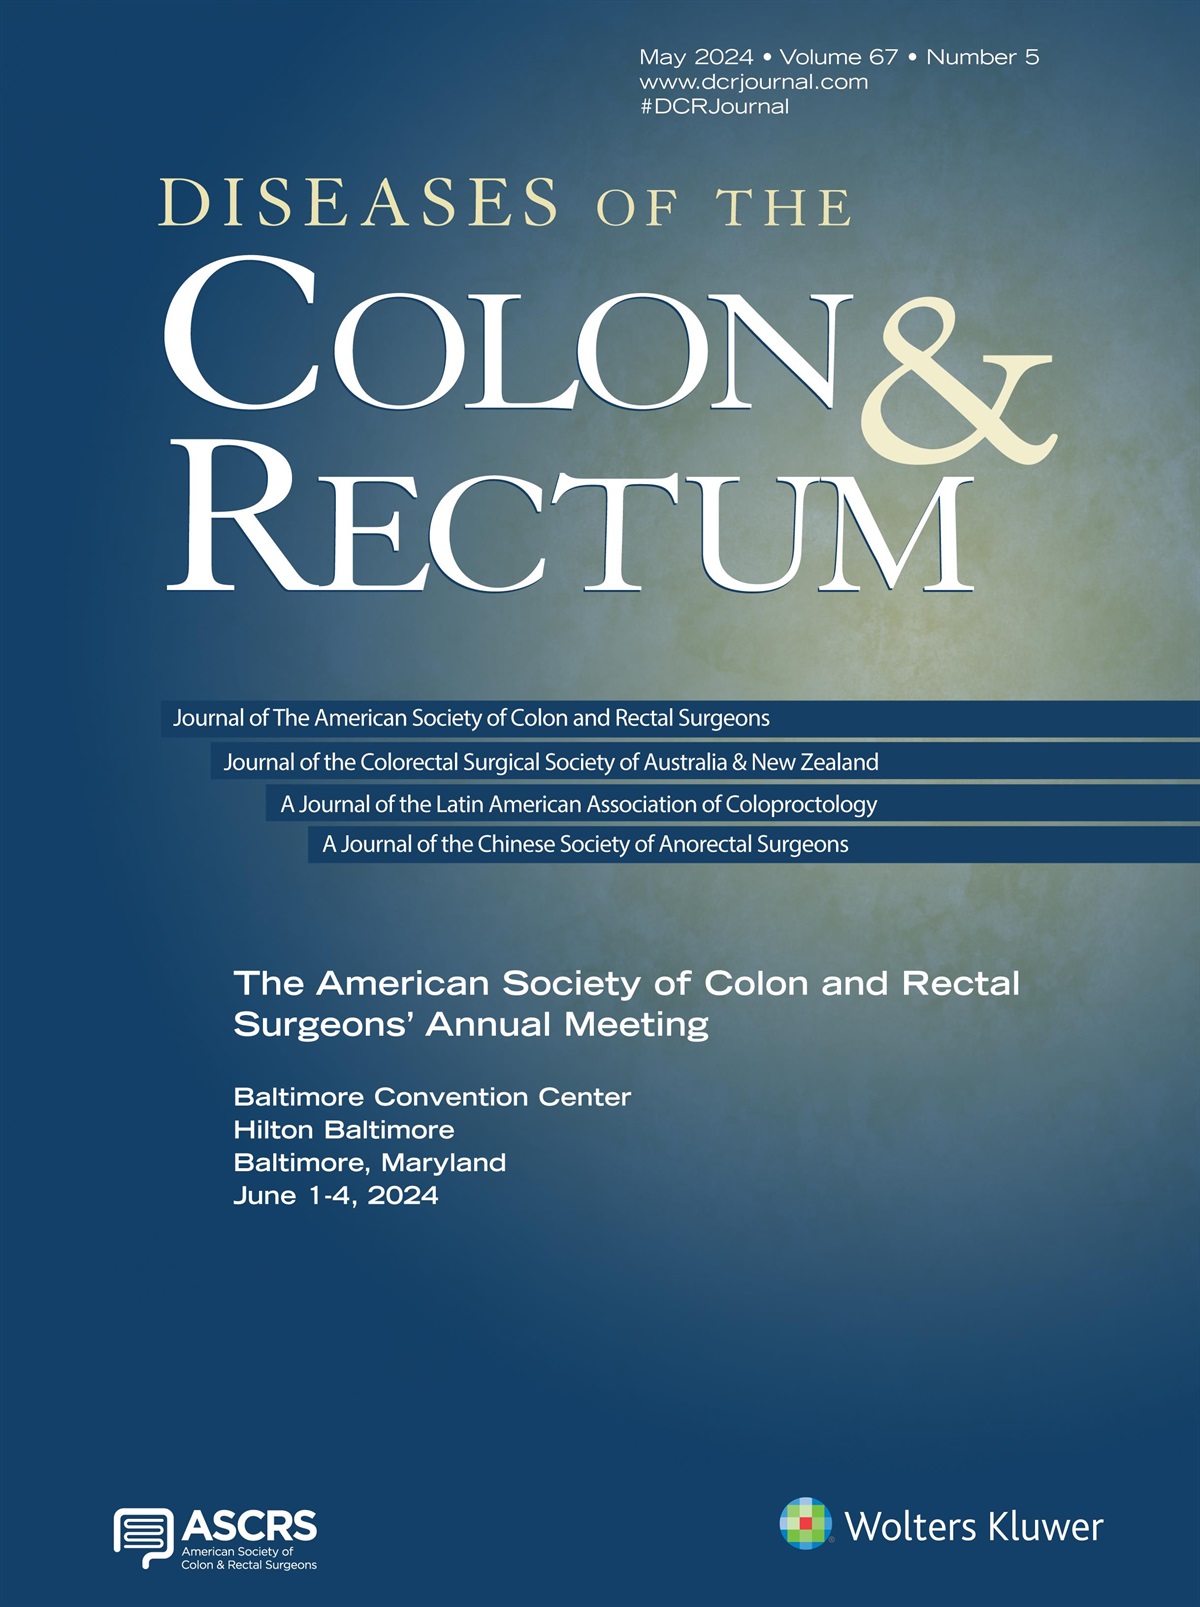 Expert Commentary on Management of Stercoral Colitis